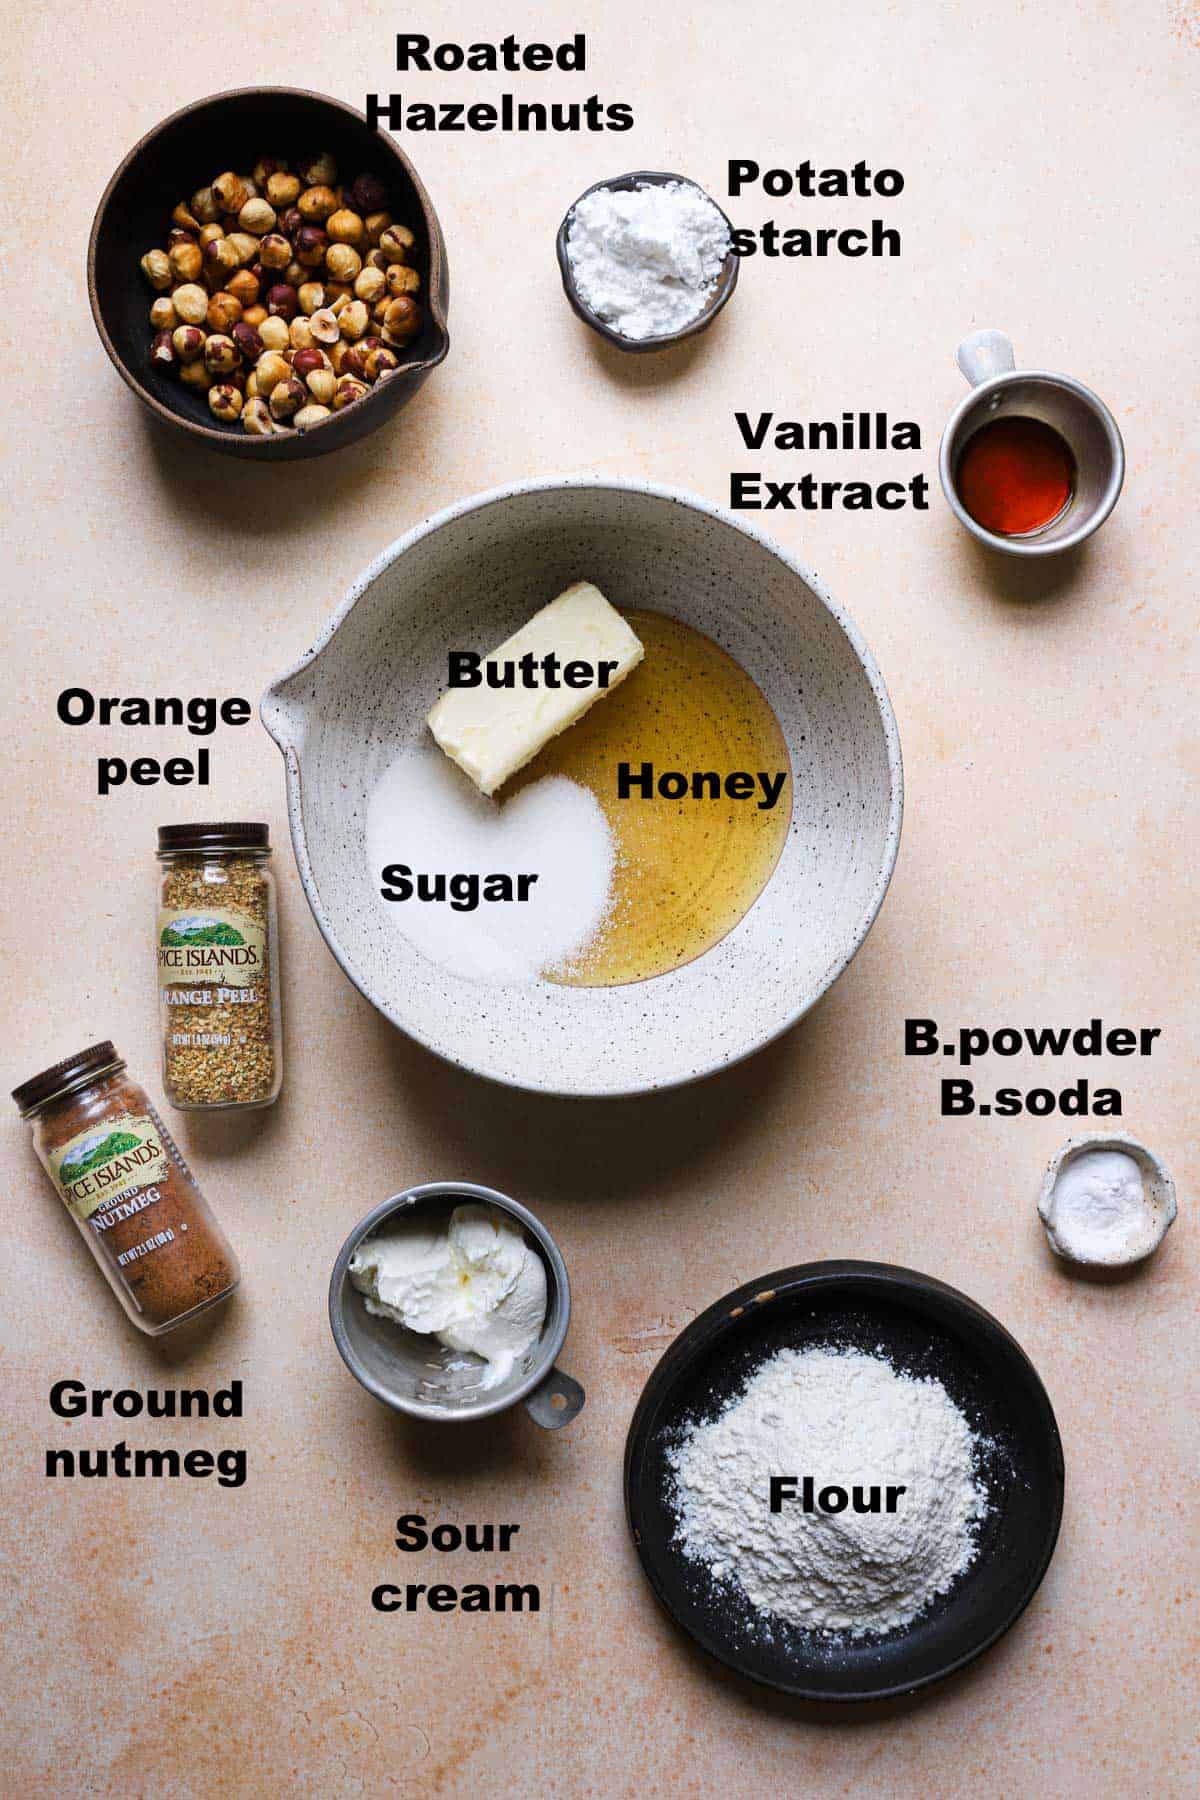 Ingredients to make topping for hazelnut torte